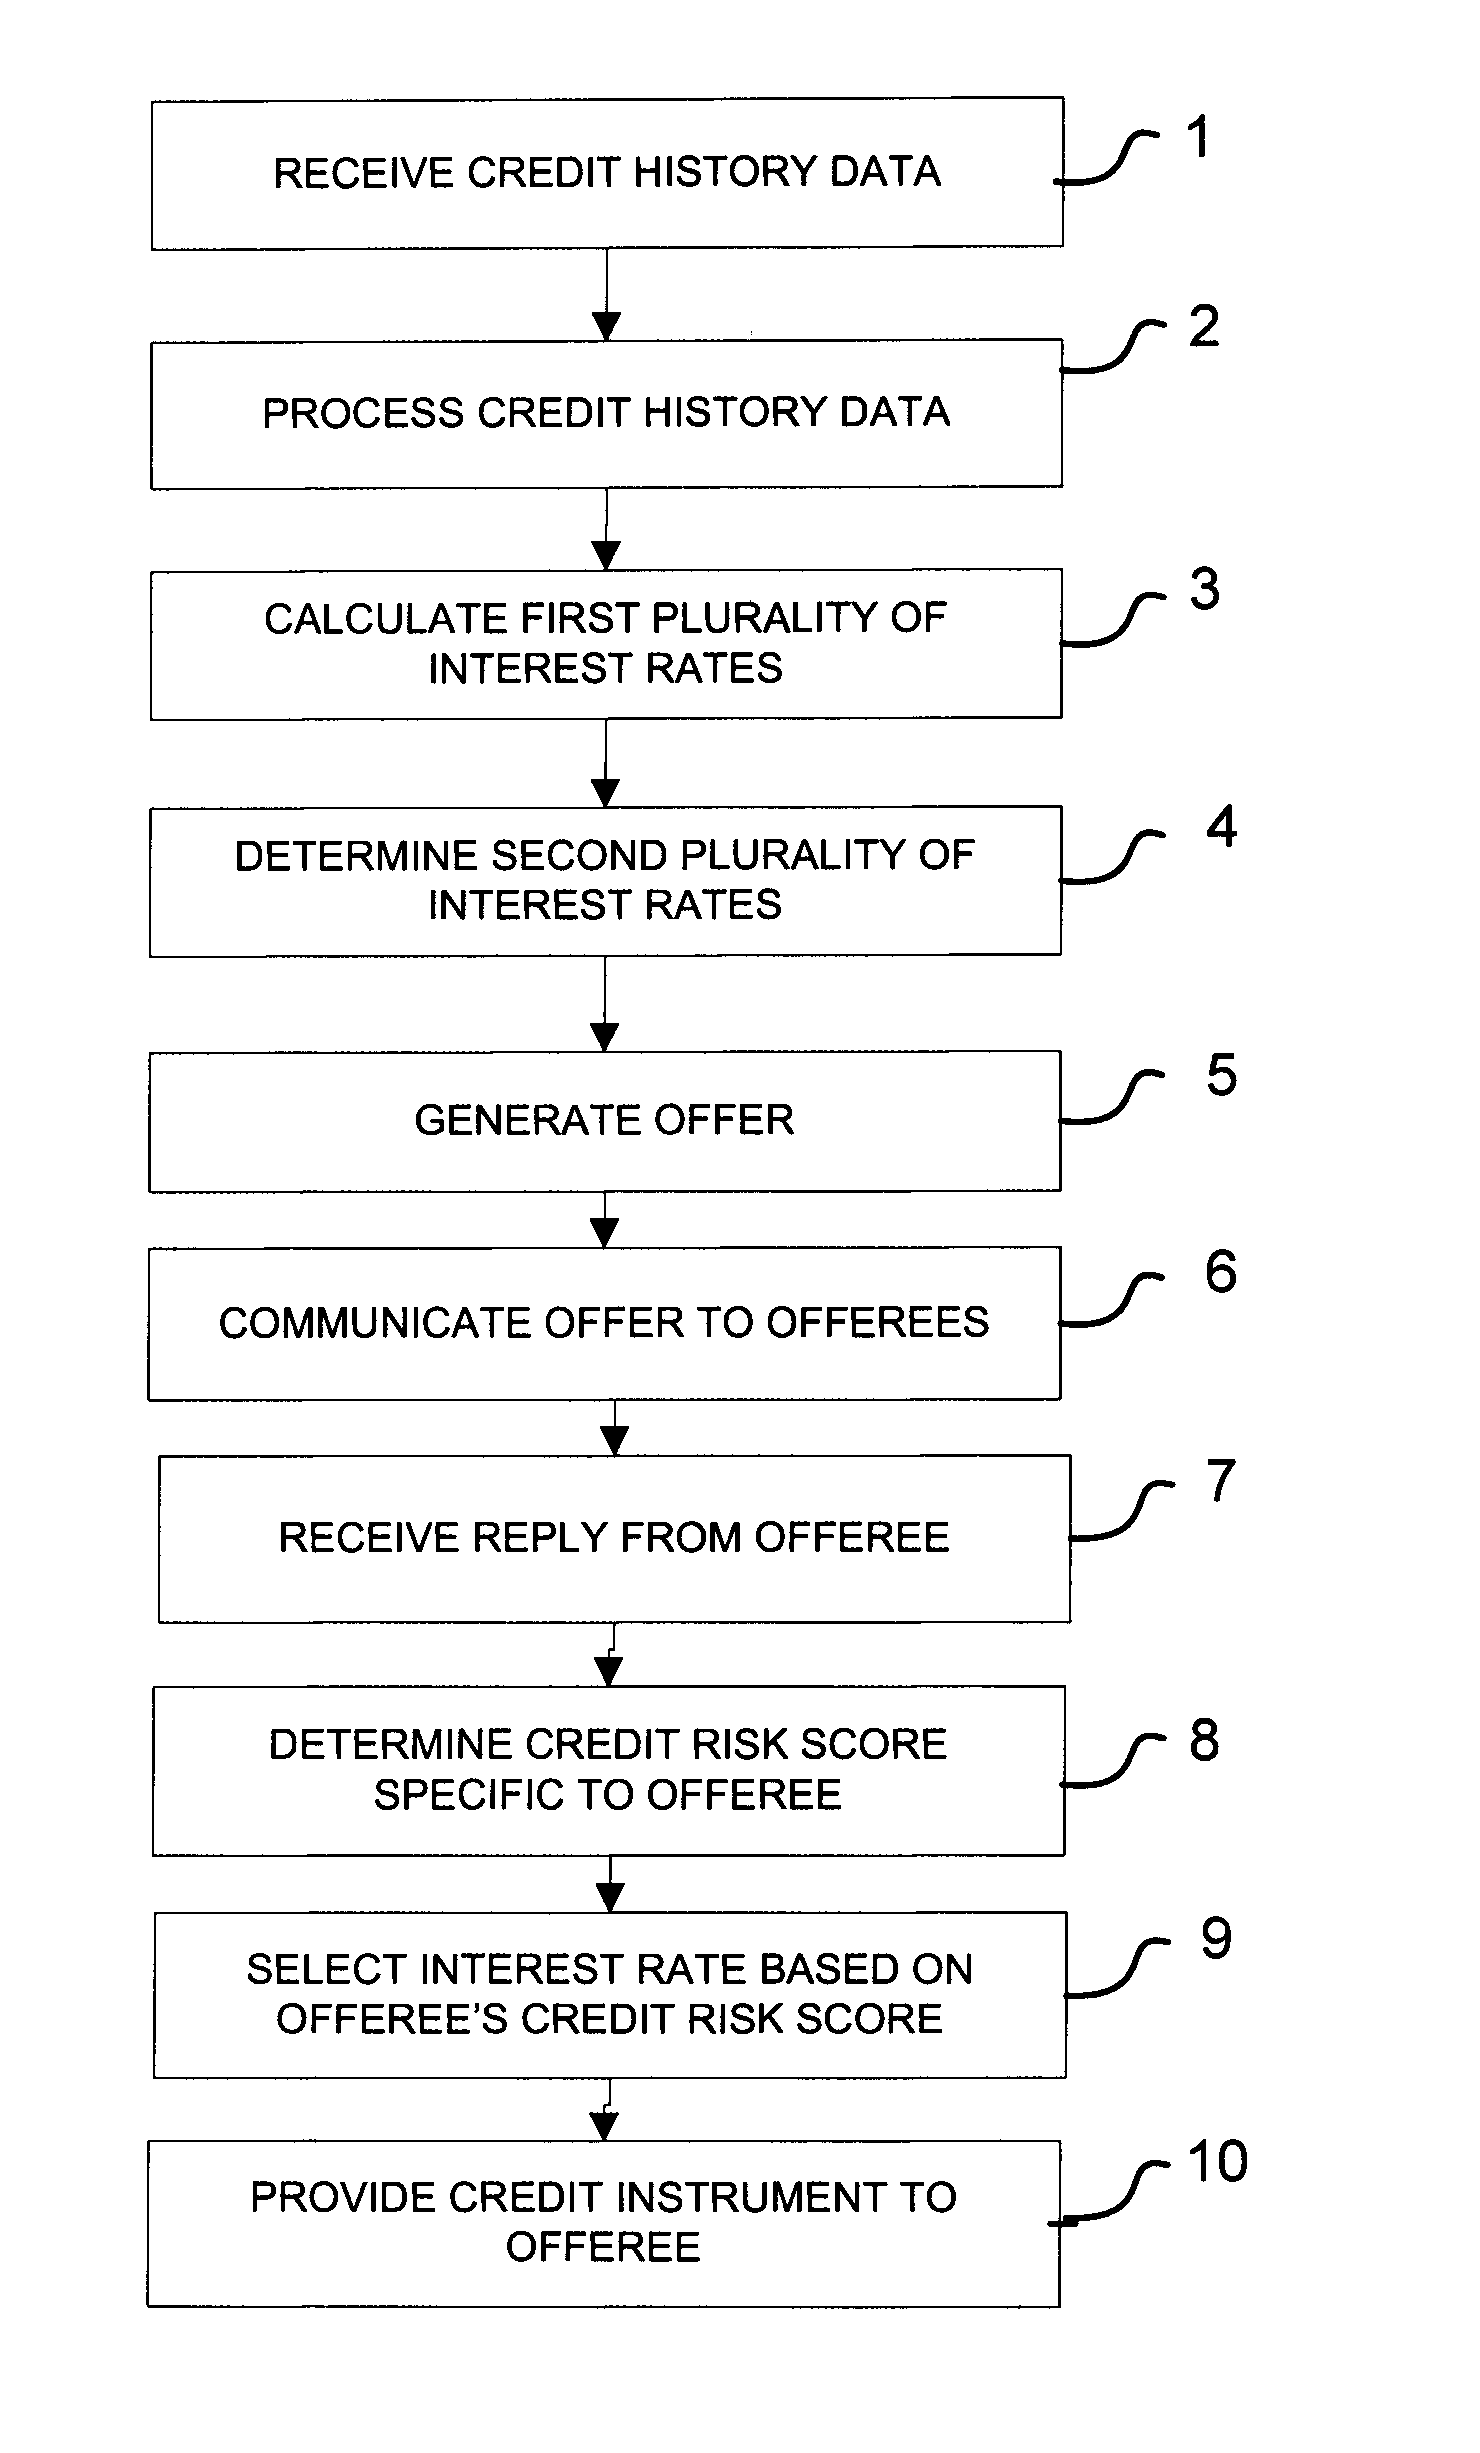 System and method for offering risk-based interest rates in a credit instrument